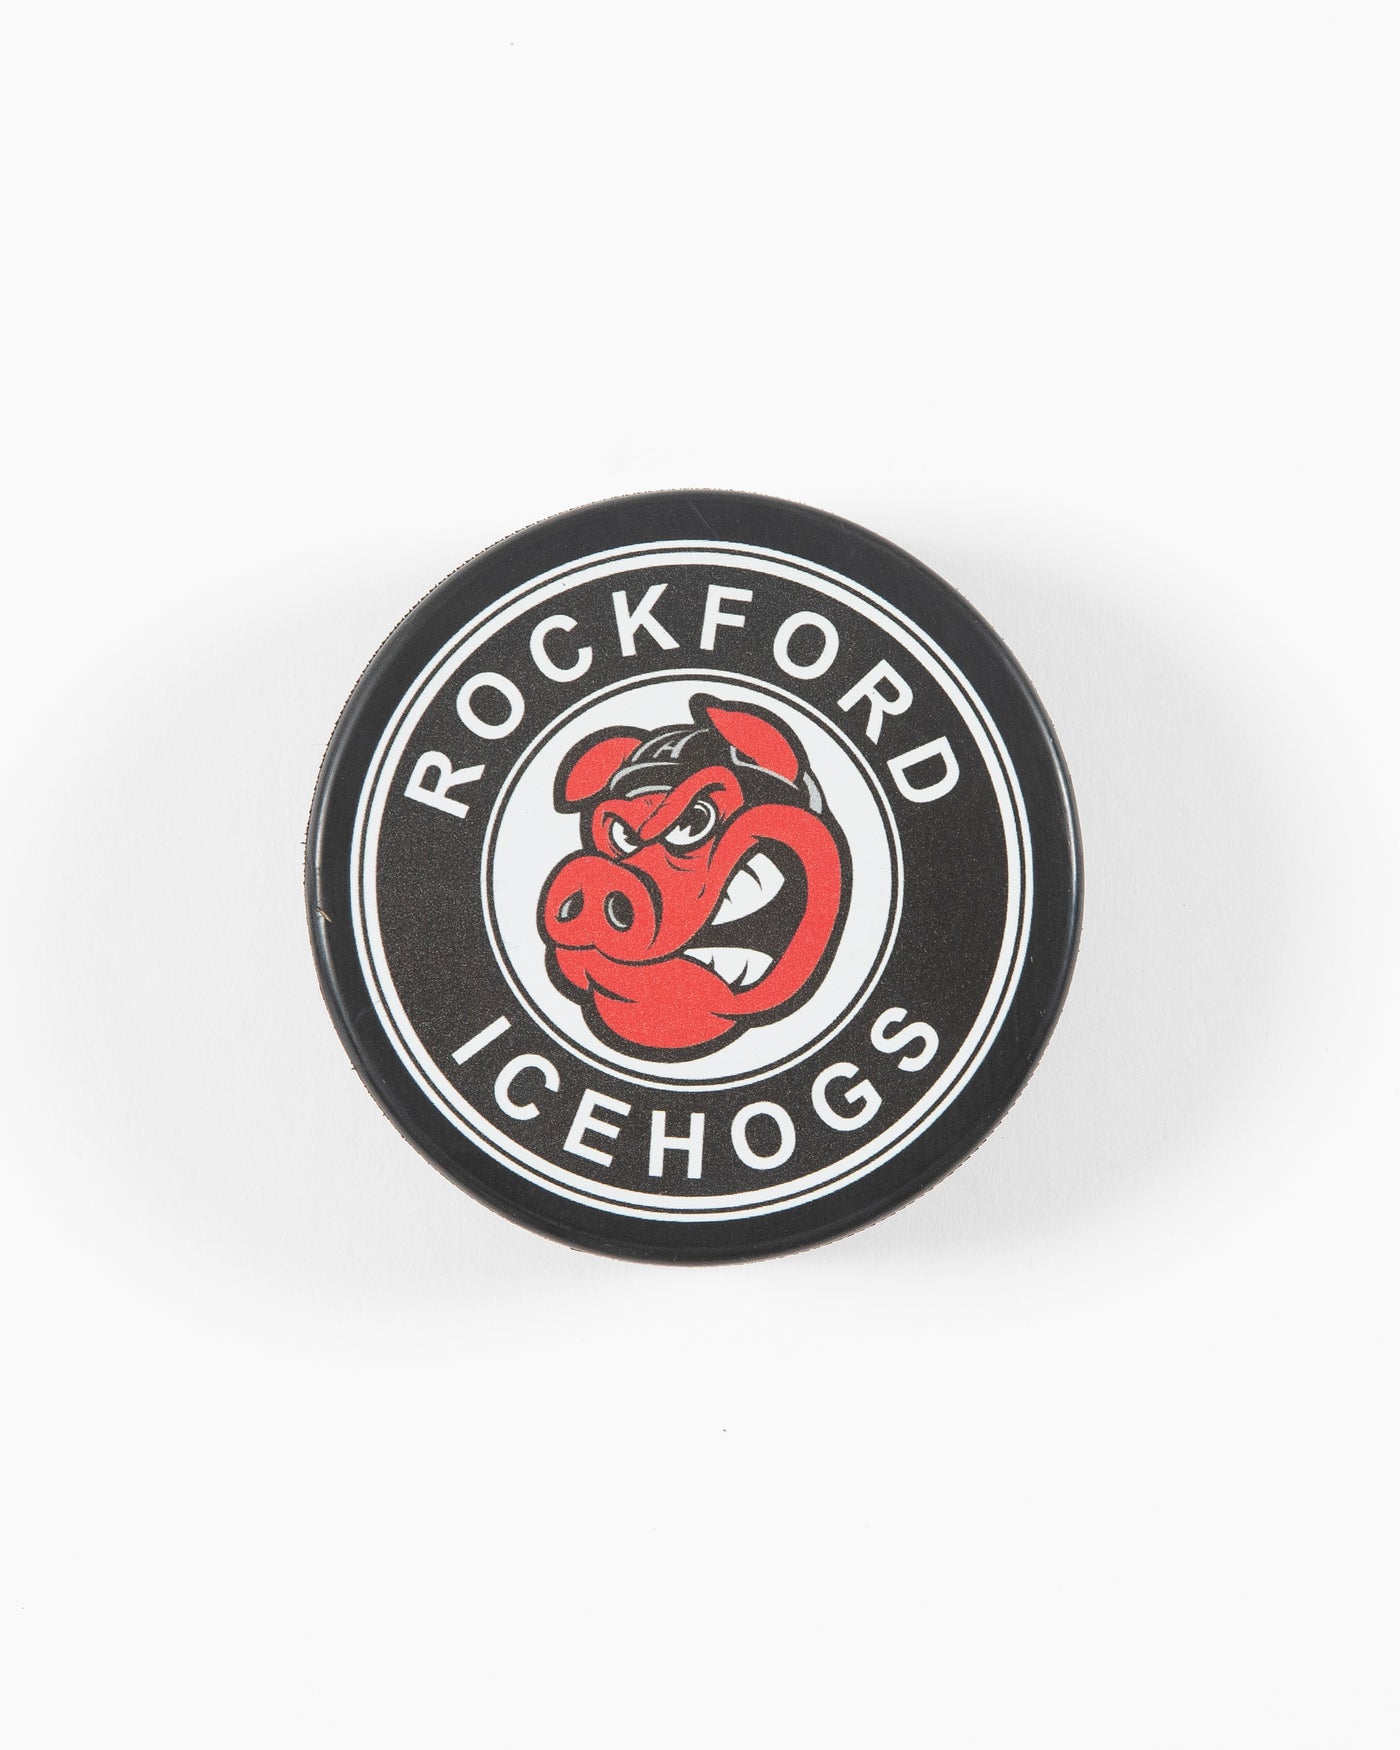 black hockey puck with Rockford IceHogs logo on front - front lay flat